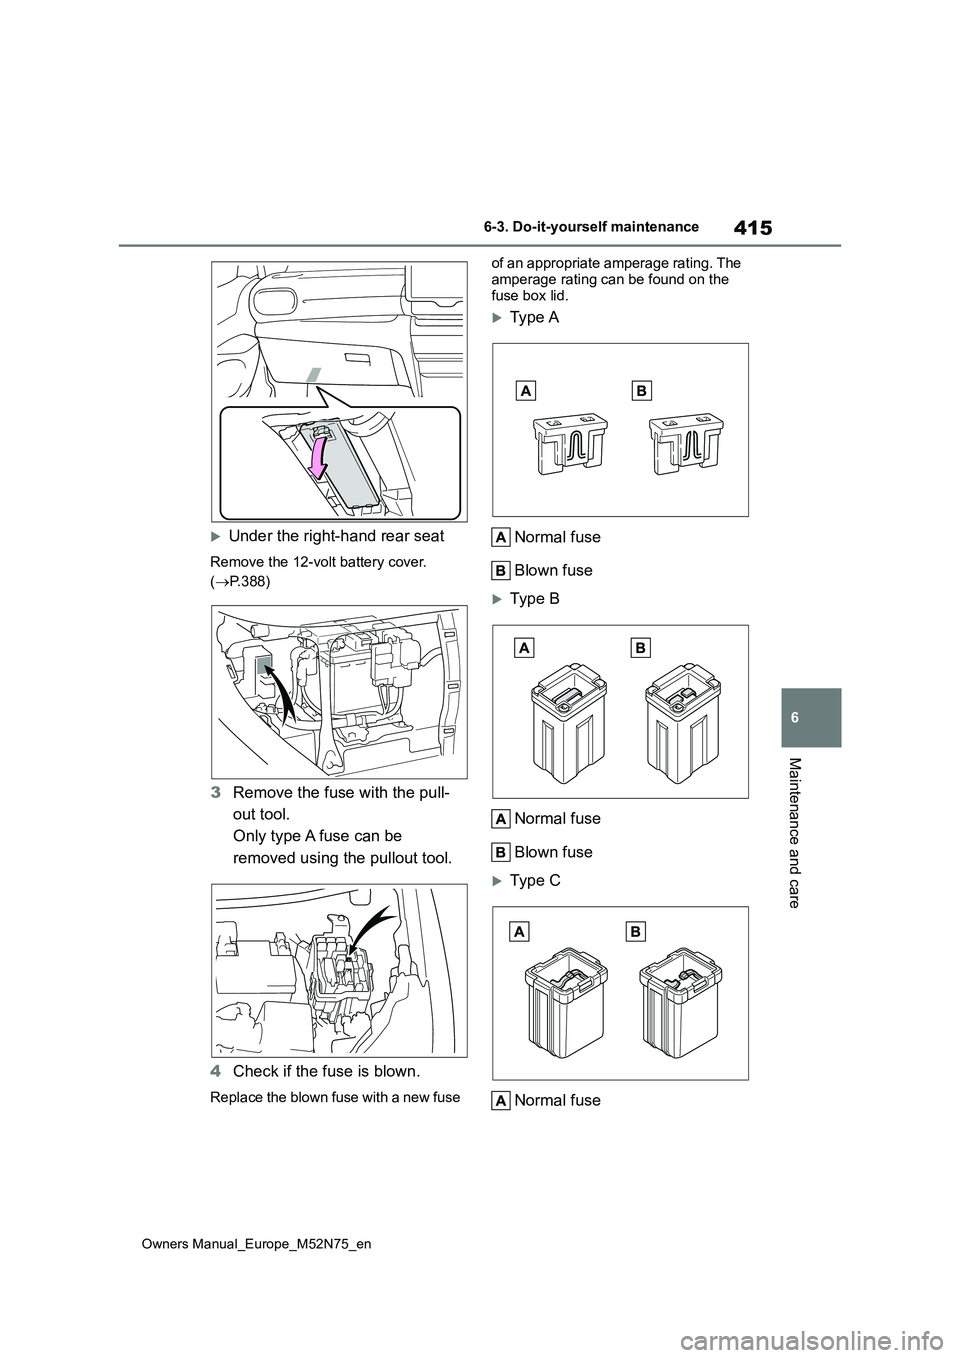 TOYOTA YARIS CROSS 2023  Owners Manual 415
6
Owners Manual_Europe_M52N75_en
6-3. Do-it-yourself maintenance
Maintenance and care
Under the right-hand rear seat
Remove the 12-volt battery cover.  
( P.388)
3Remove the fuse with the pu